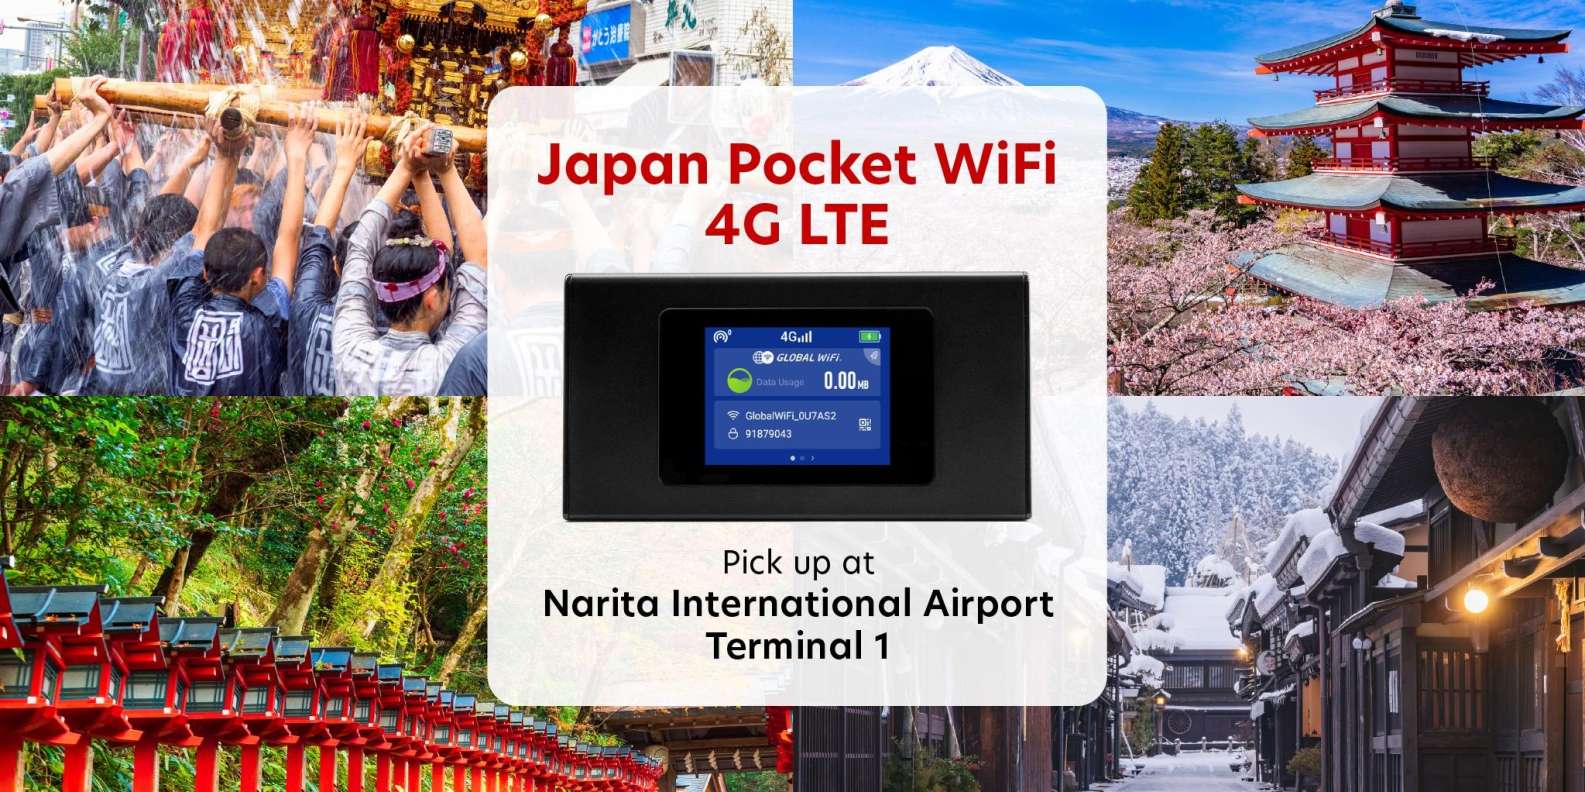 WiFi Router Rental with Easy Airport Pick-up or Hotel Delivery in Tokyo  tours, activities, fun things to do in Tokyo(Japan)｜VELTRA